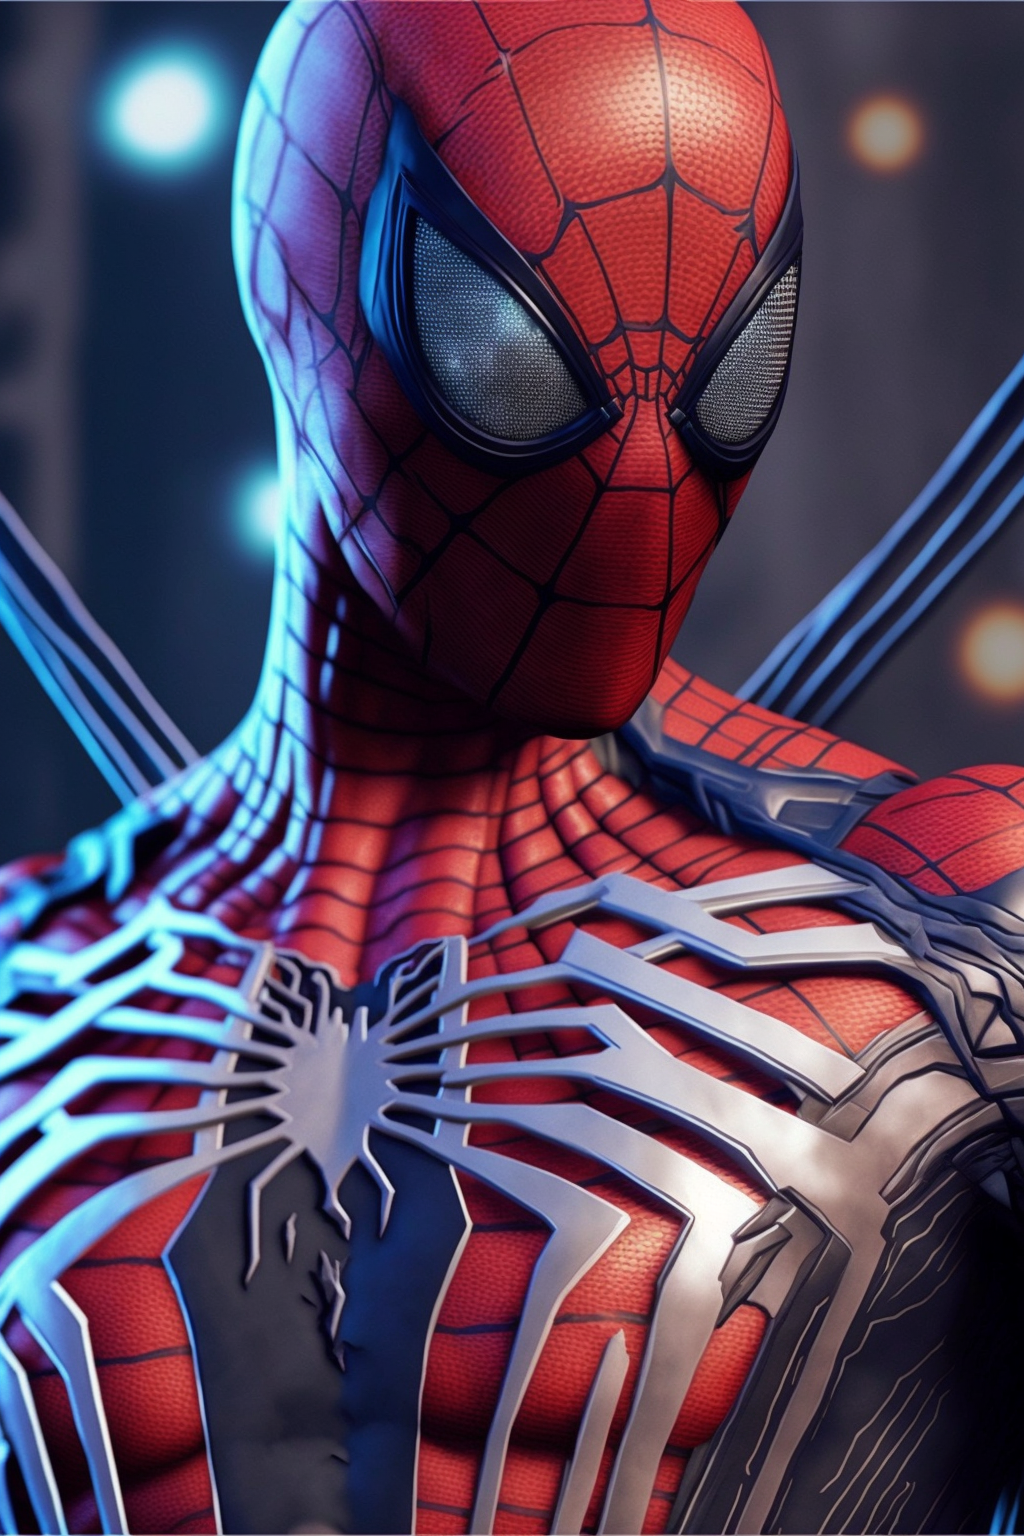 An 8K illustration of a robotic Spider-Man, showcasing intricate suit details and a dynamic pose, inspired